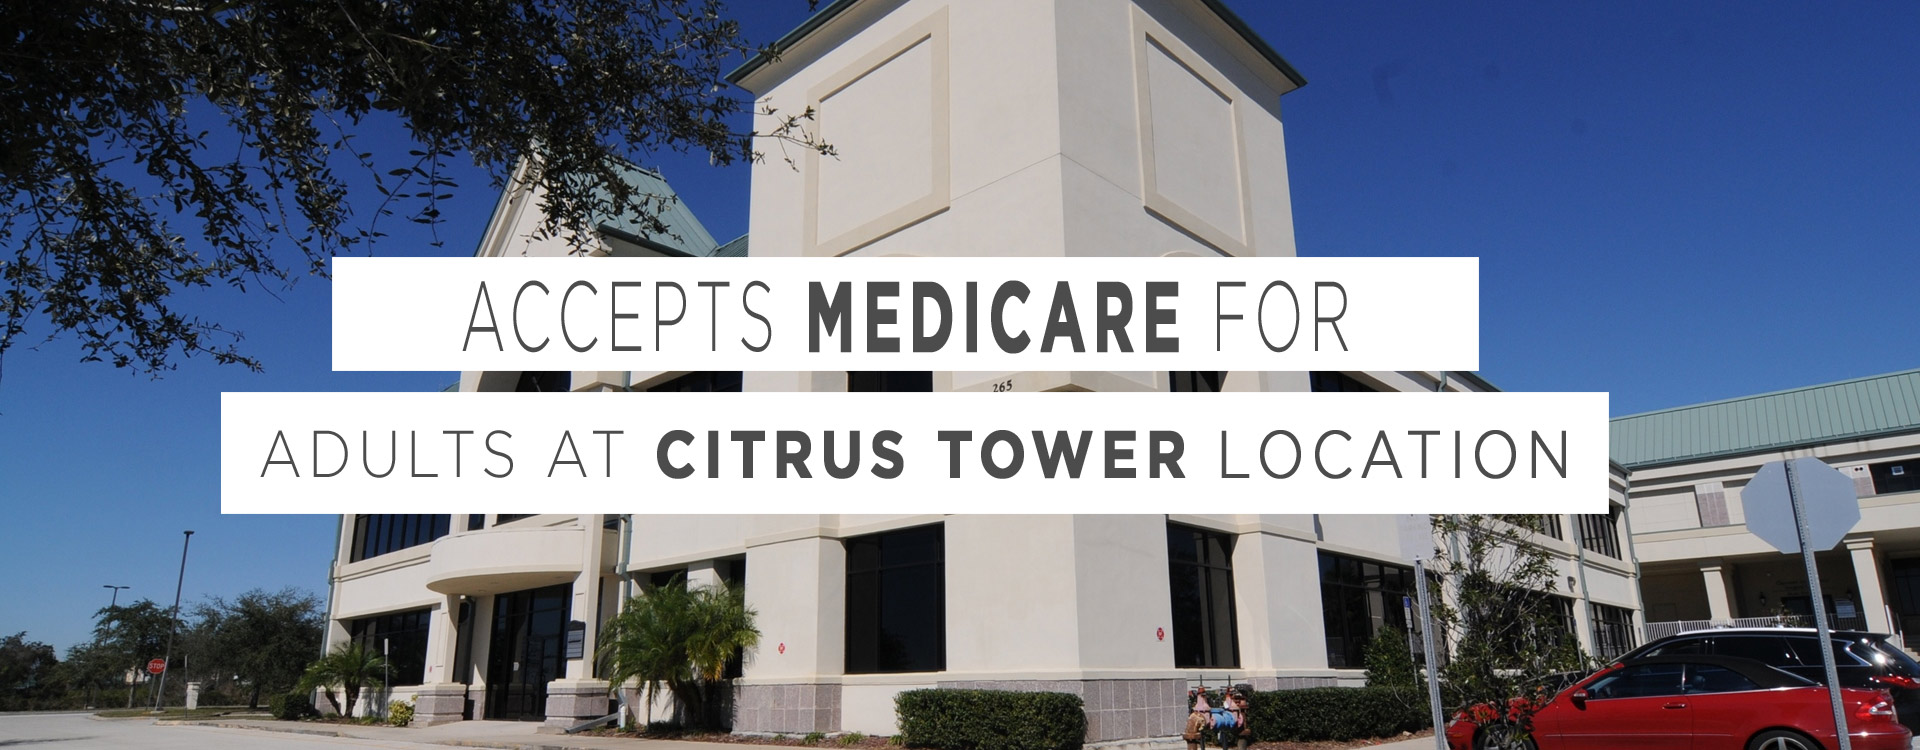 Accepts Medicare for adults at citrus tower location